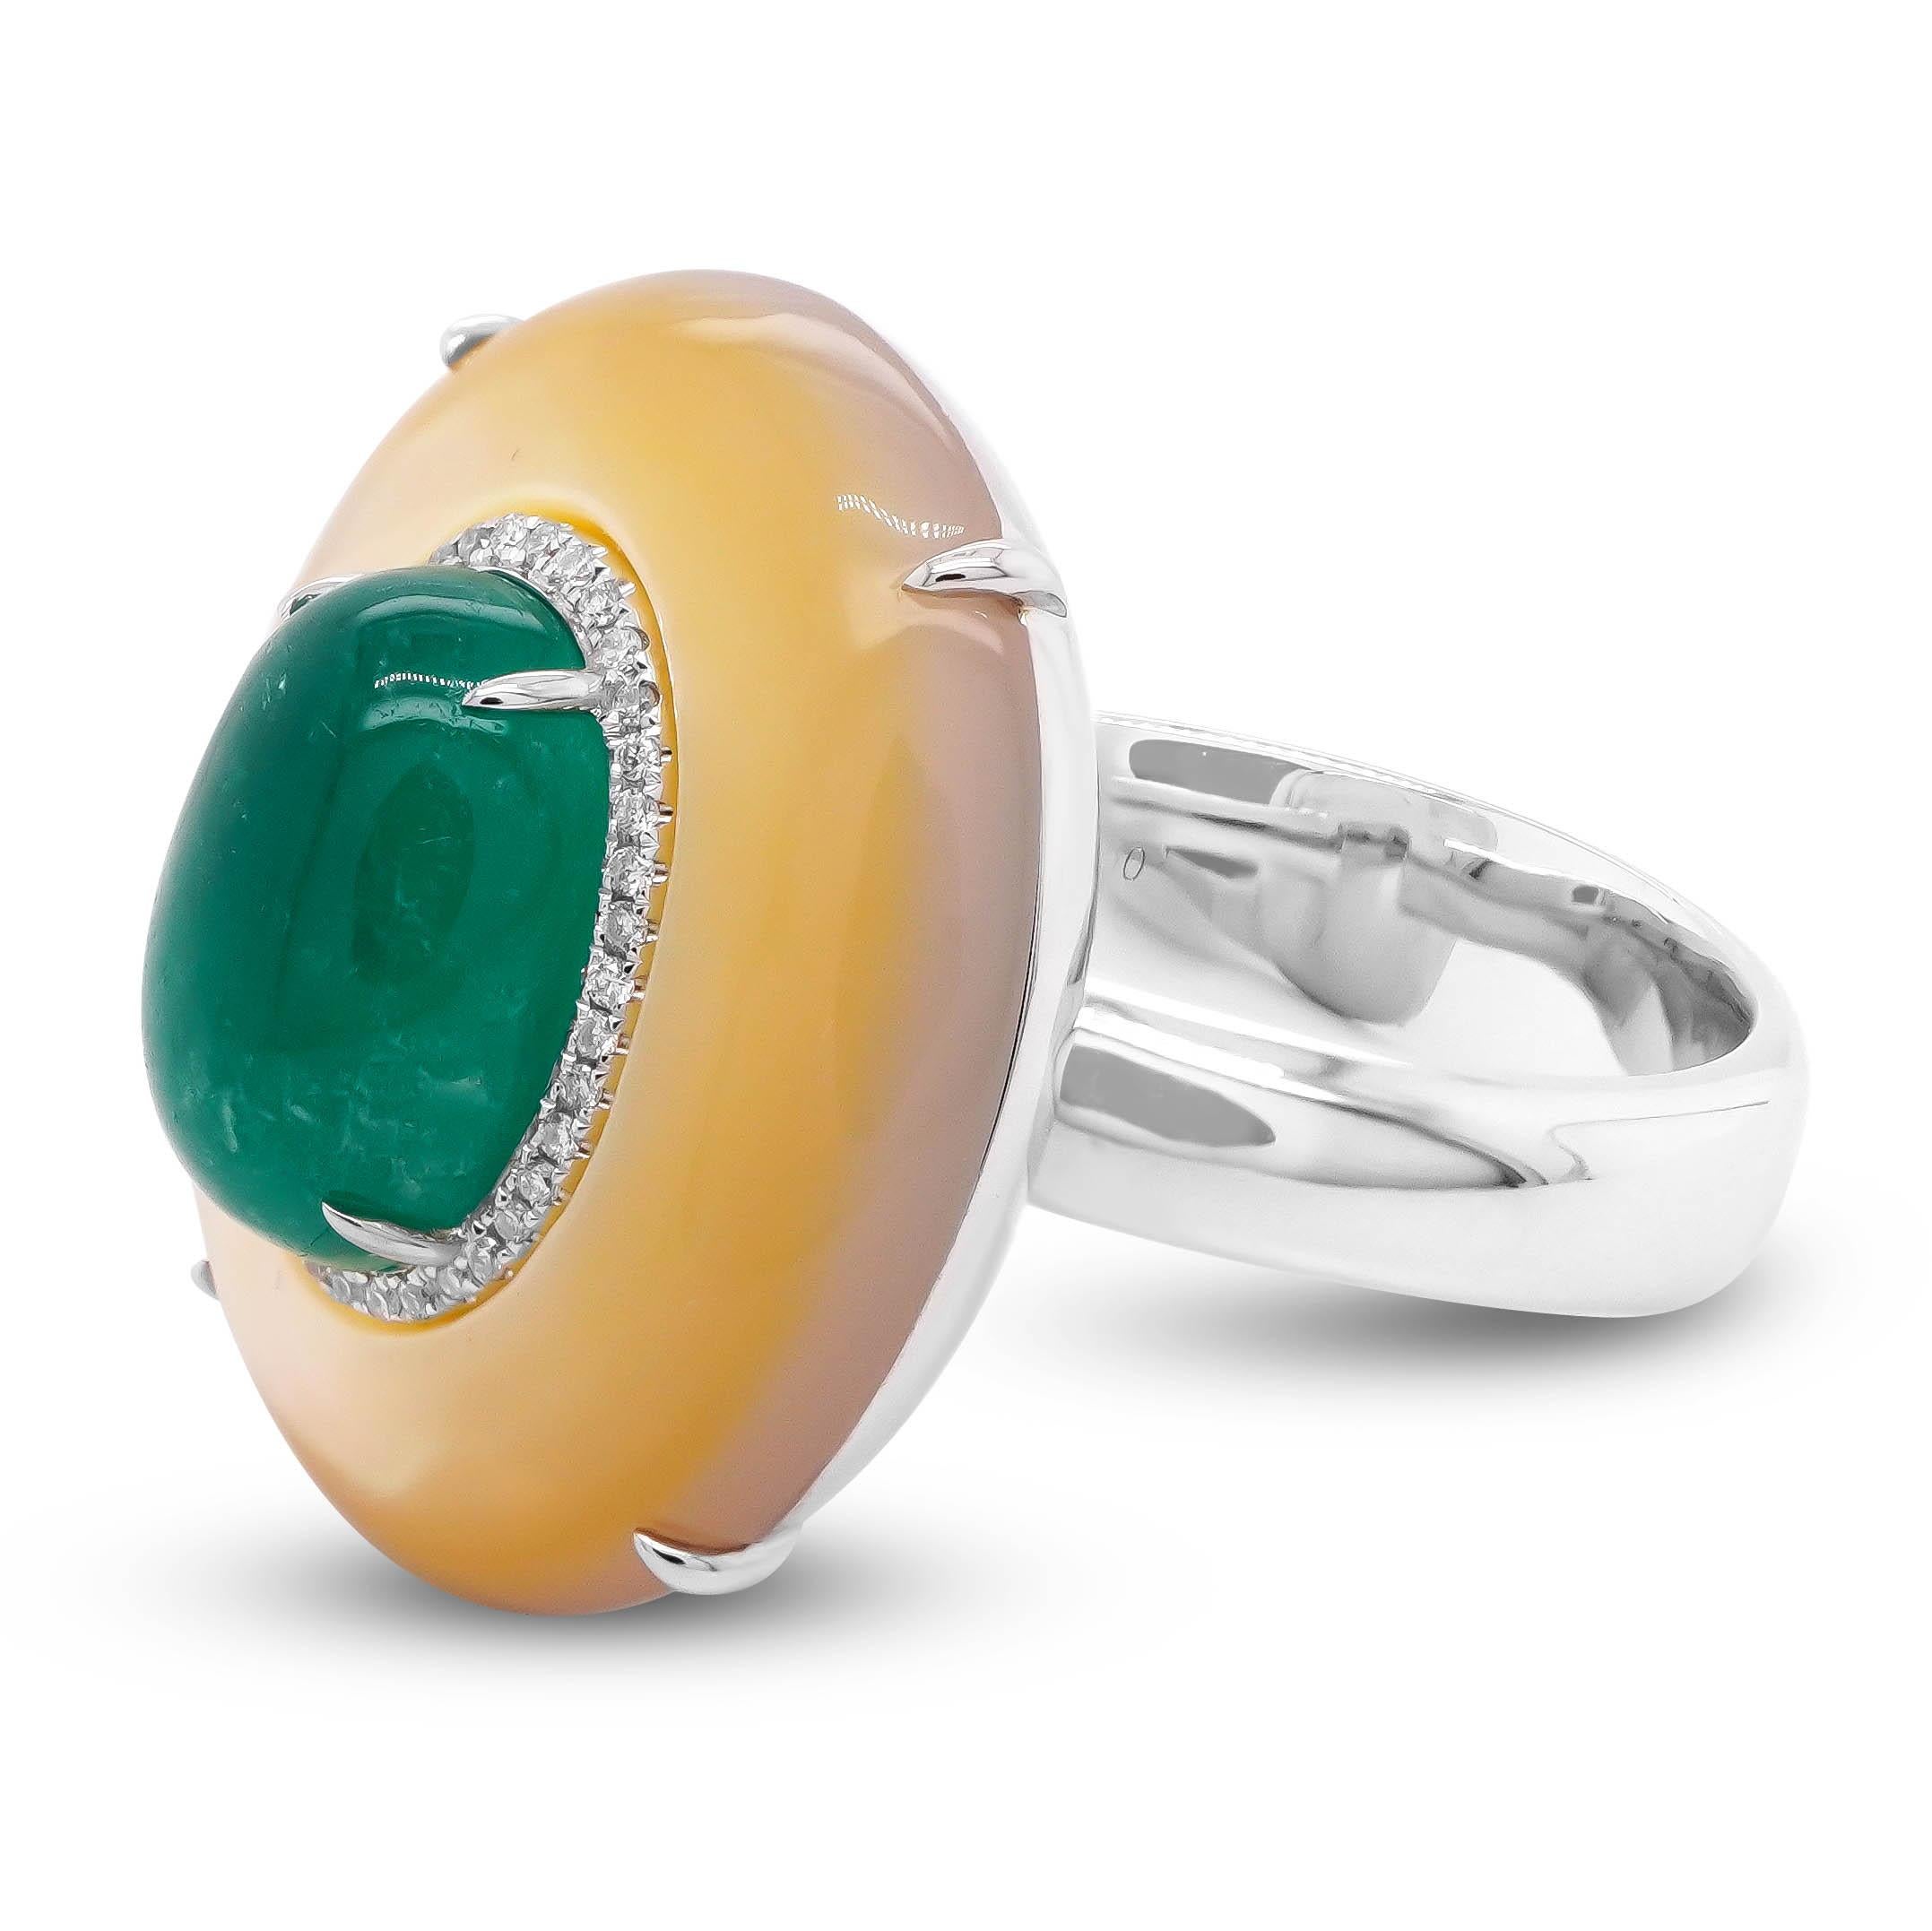 An intense green Colombian Emerald weighing 2.67 carat is encrusted in a yellow shell as a crown in this 18K white gold ring. A total of 0.06 carat of white round brilliant diamond are set in this cocktail ring. The details of the diamond are